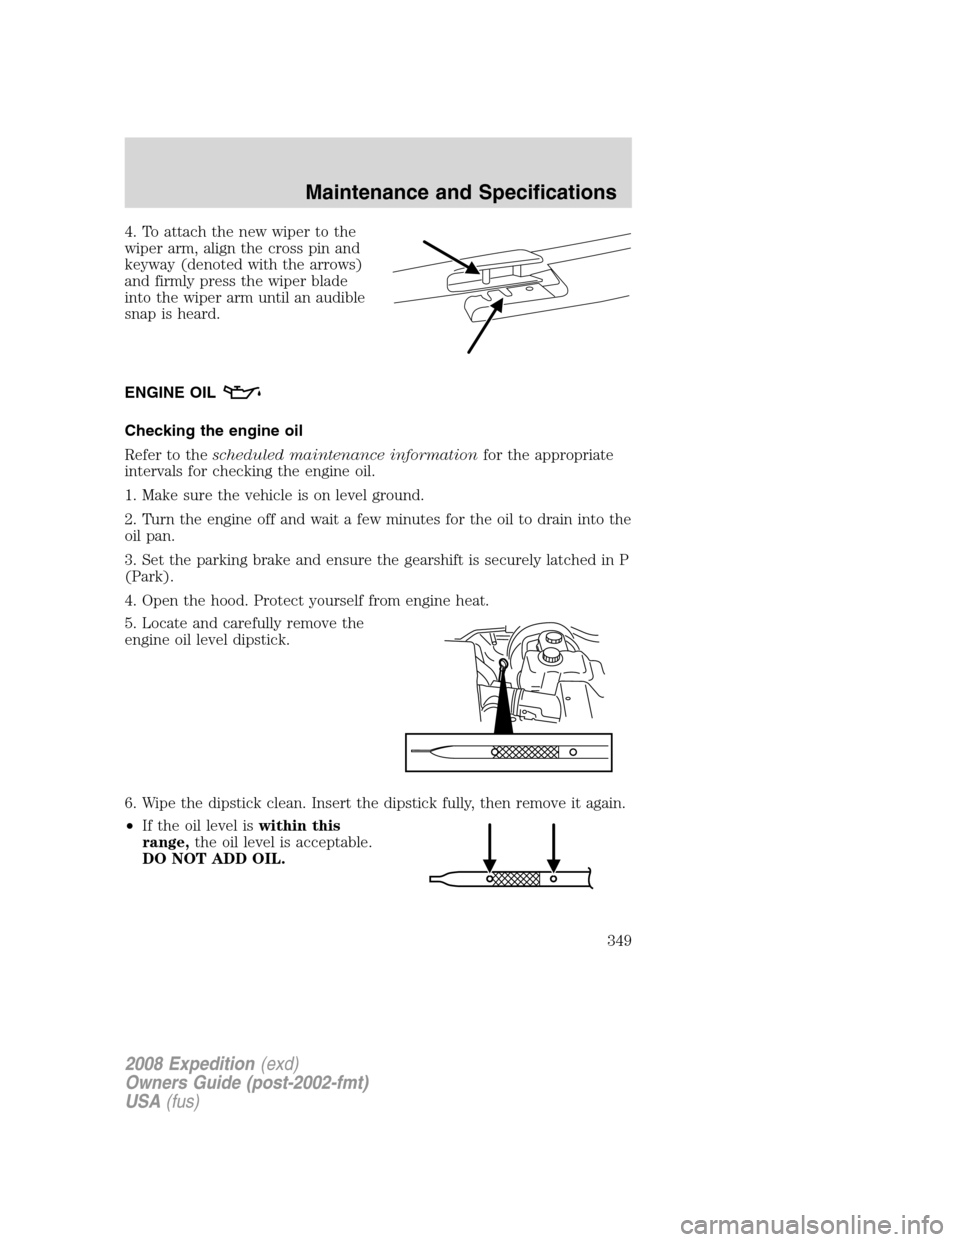 FORD EXPEDITION 2008 3.G Owners Manual 4. To attach the new wiper to the
wiper arm, align the cross pin and
keyway (denoted with the arrows)
and firmly press the wiper blade
into the wiper arm until an audible
snap is heard.
ENGINE OIL
Che